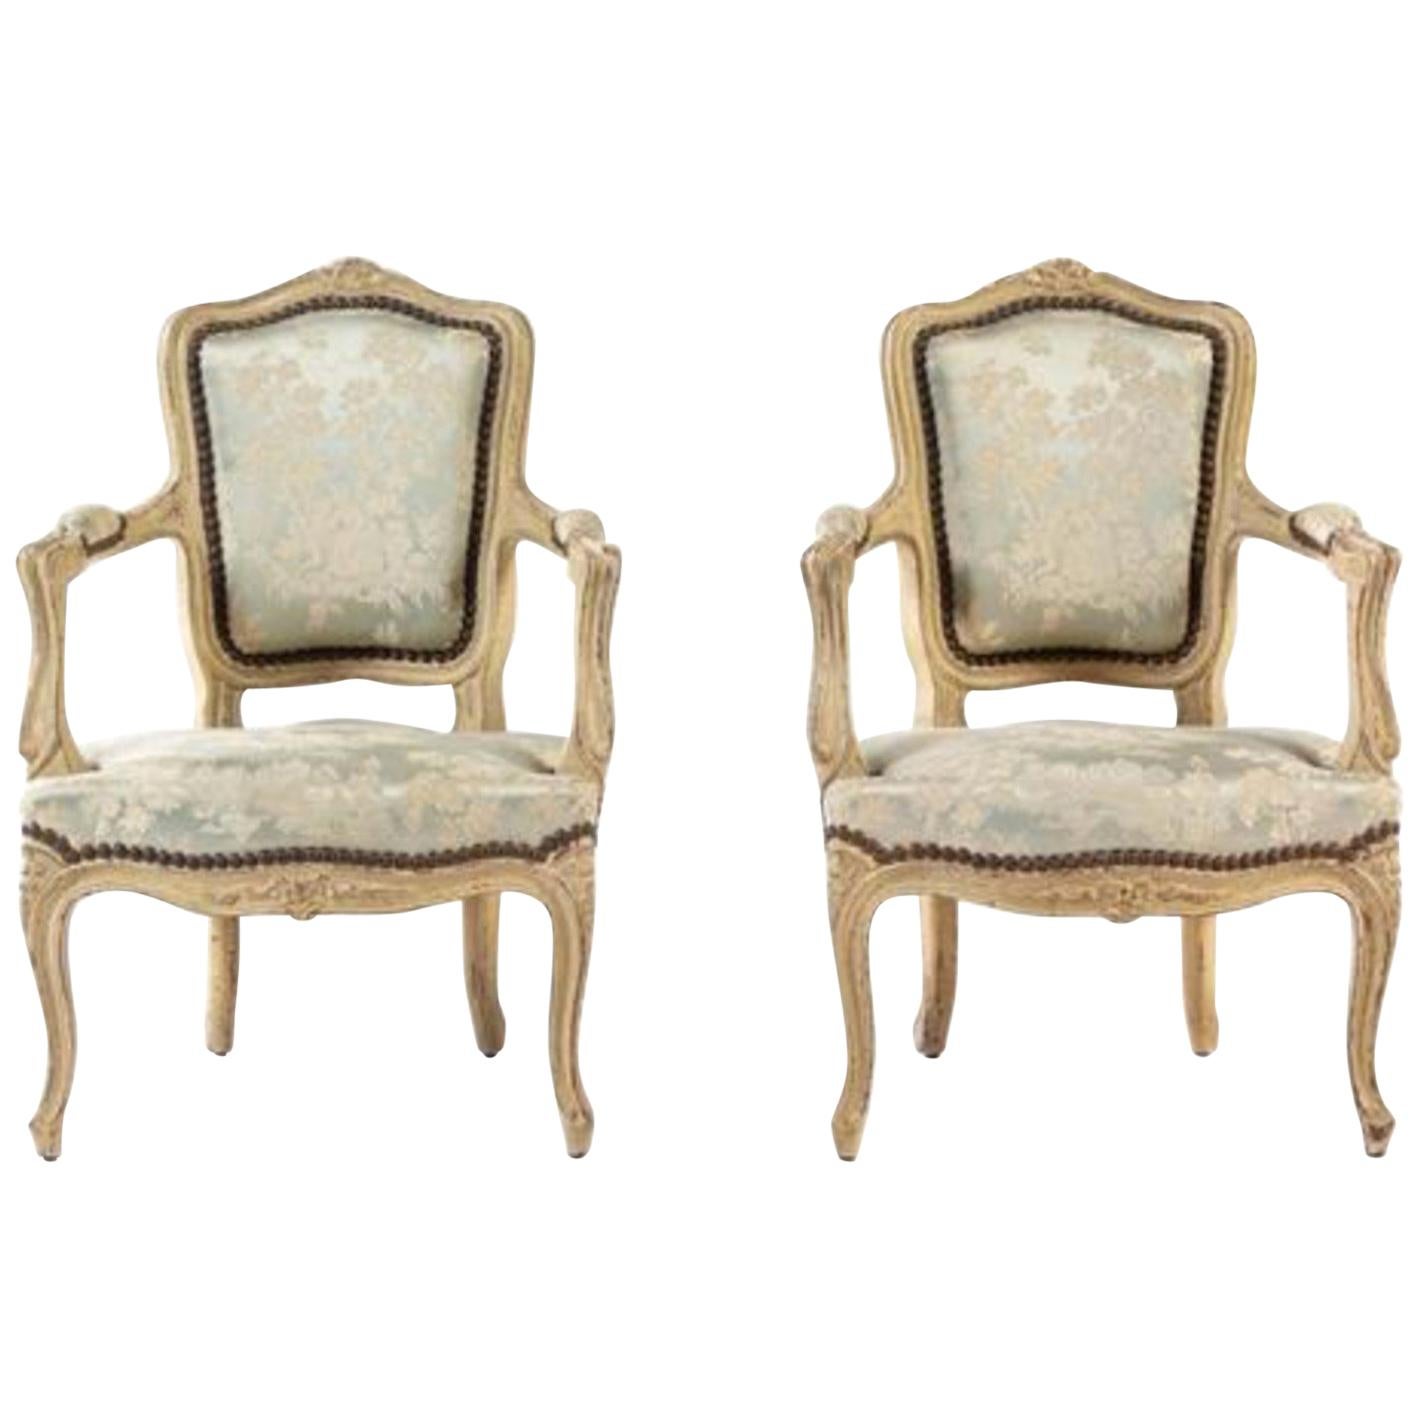 Charming 19th Century Pair of Louis XV Style Painted Child's Chairs Upholstered. For Sale